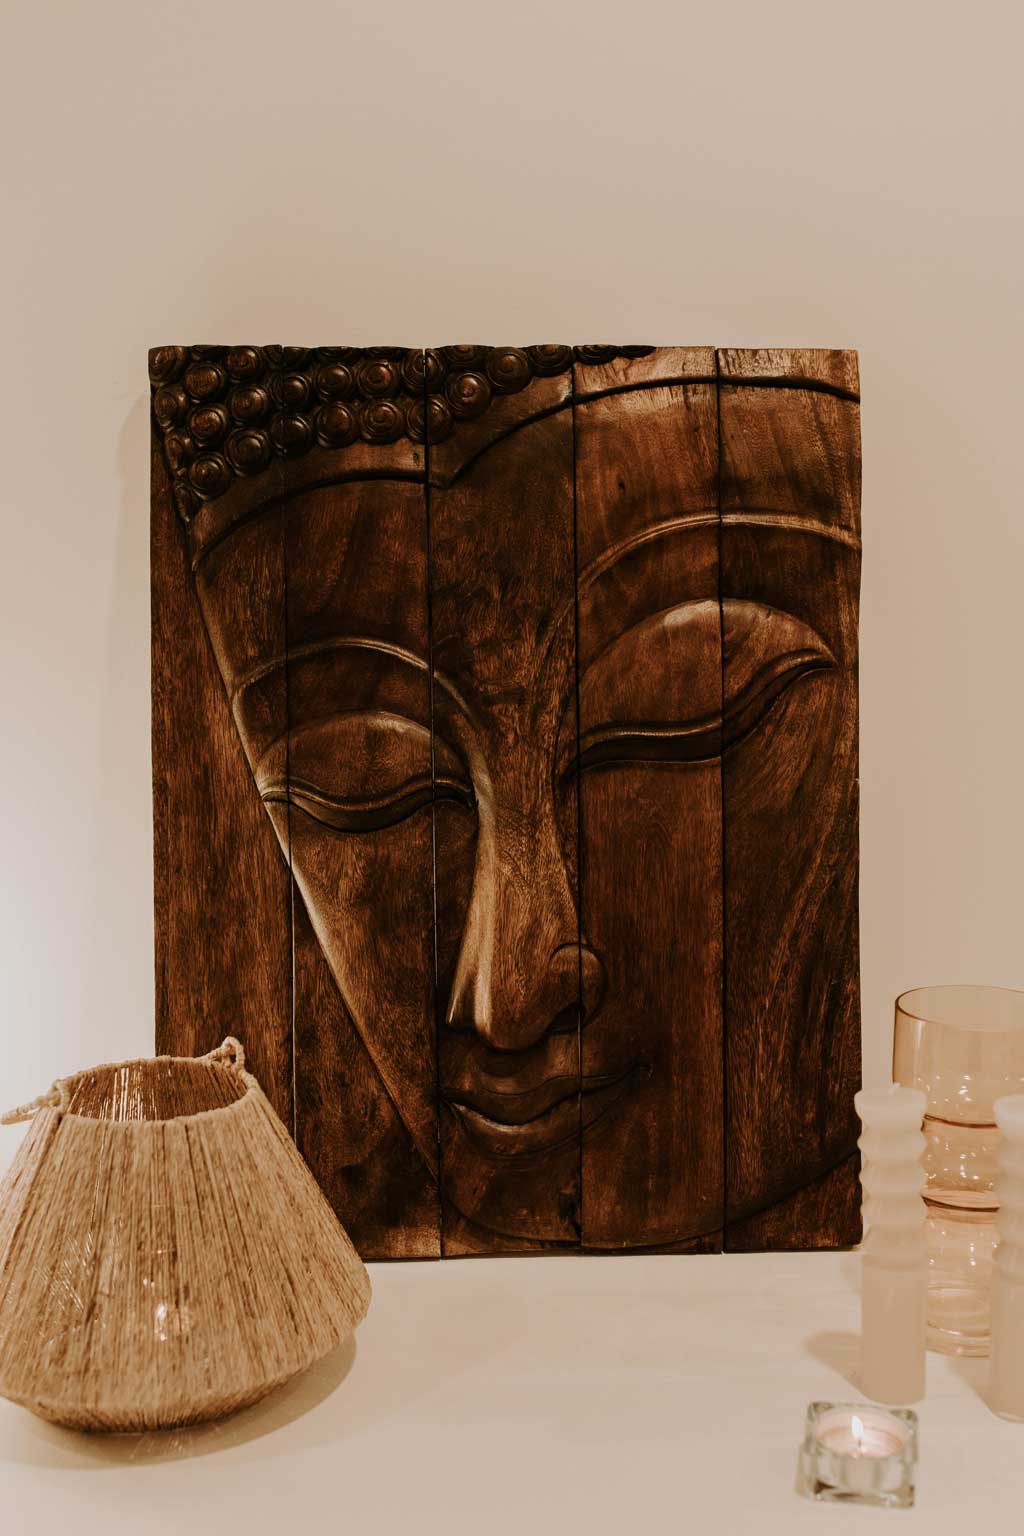 wooden carving of a face